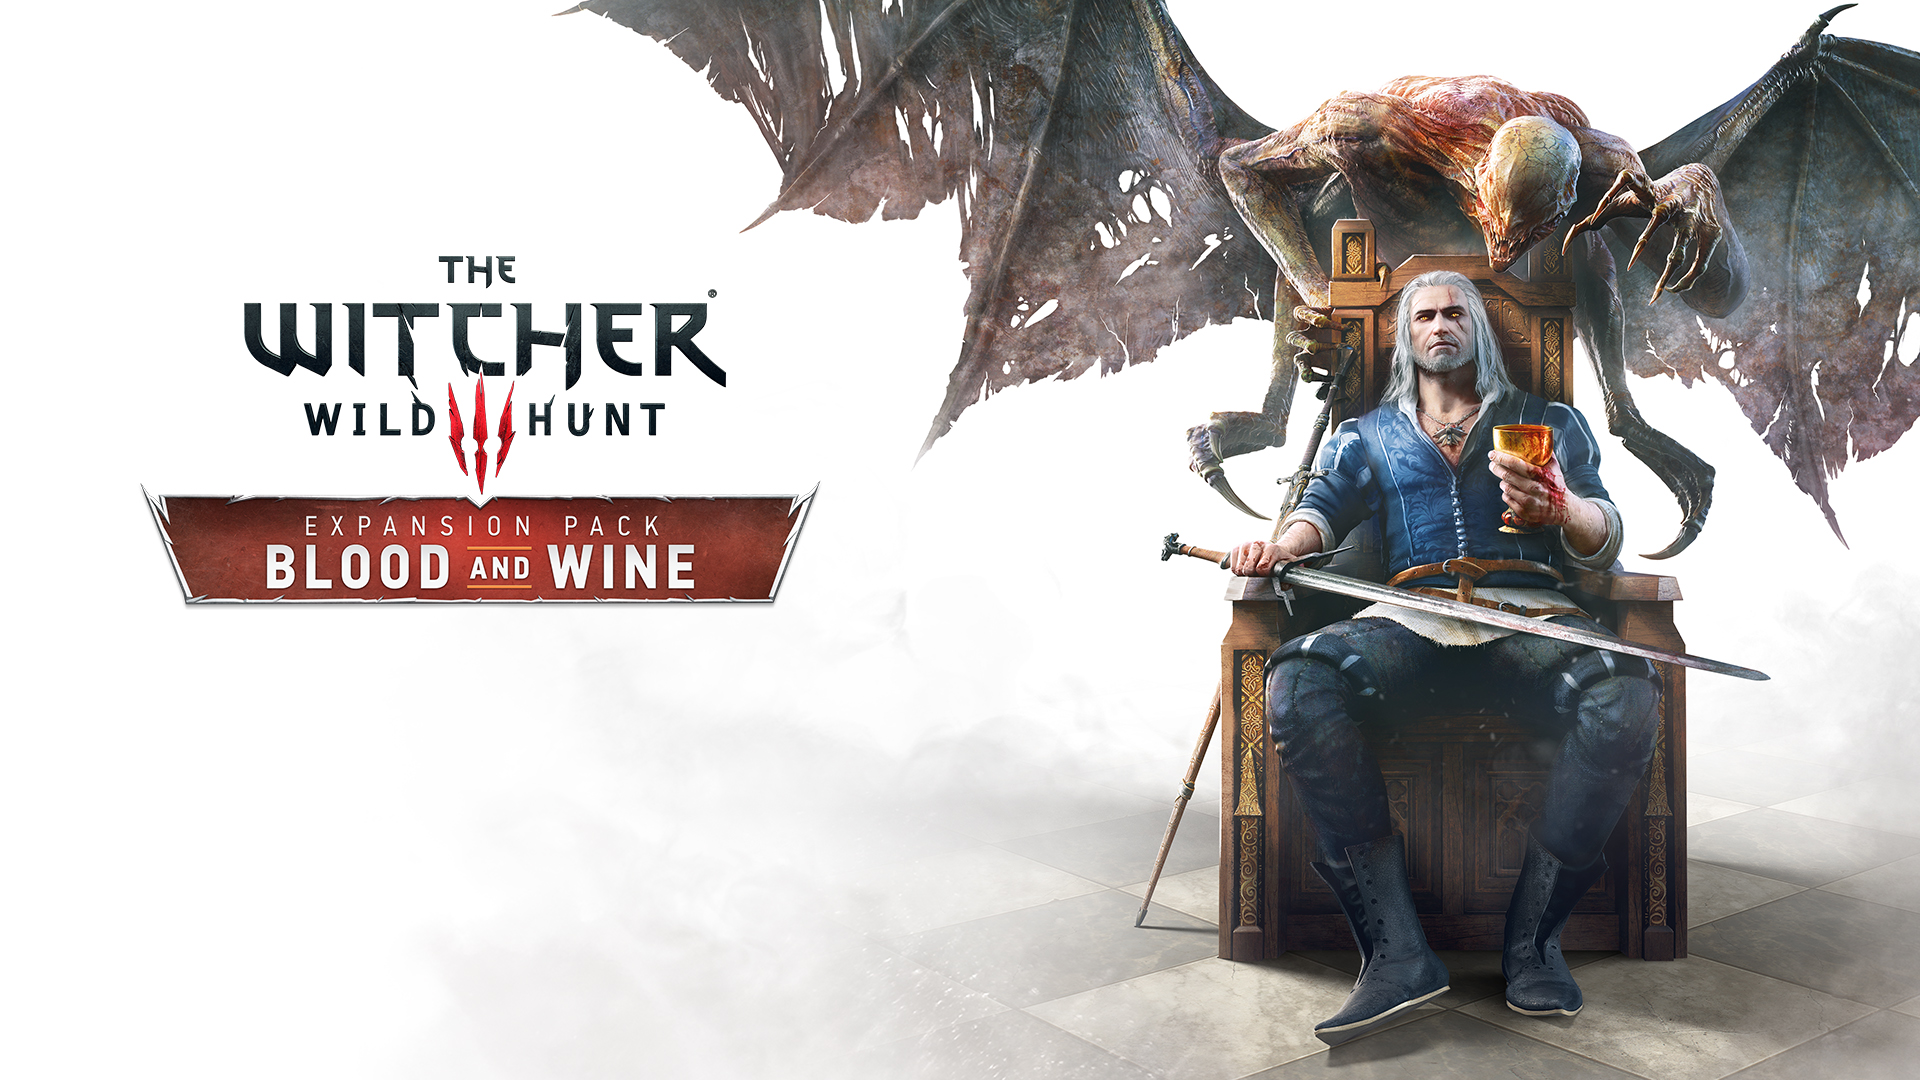 The Witcher 3: Wild Hunt and Wine (2016) promotional